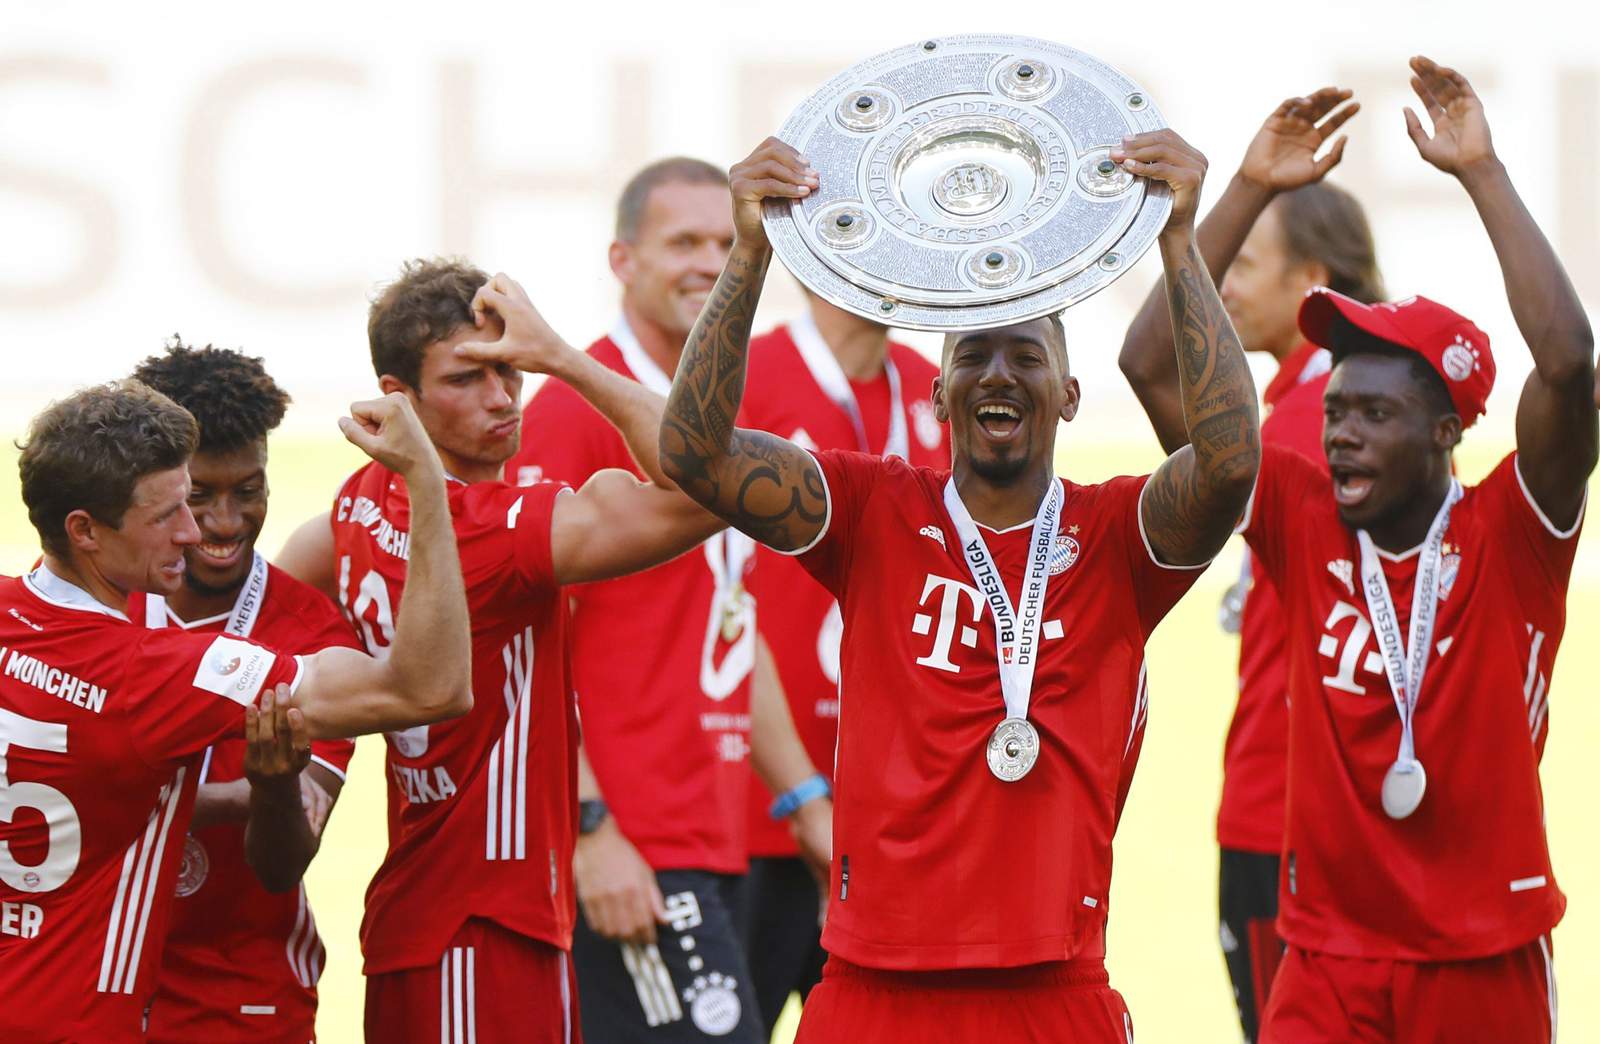 Boateng recounts pain of racist abuse to Bayern teammates